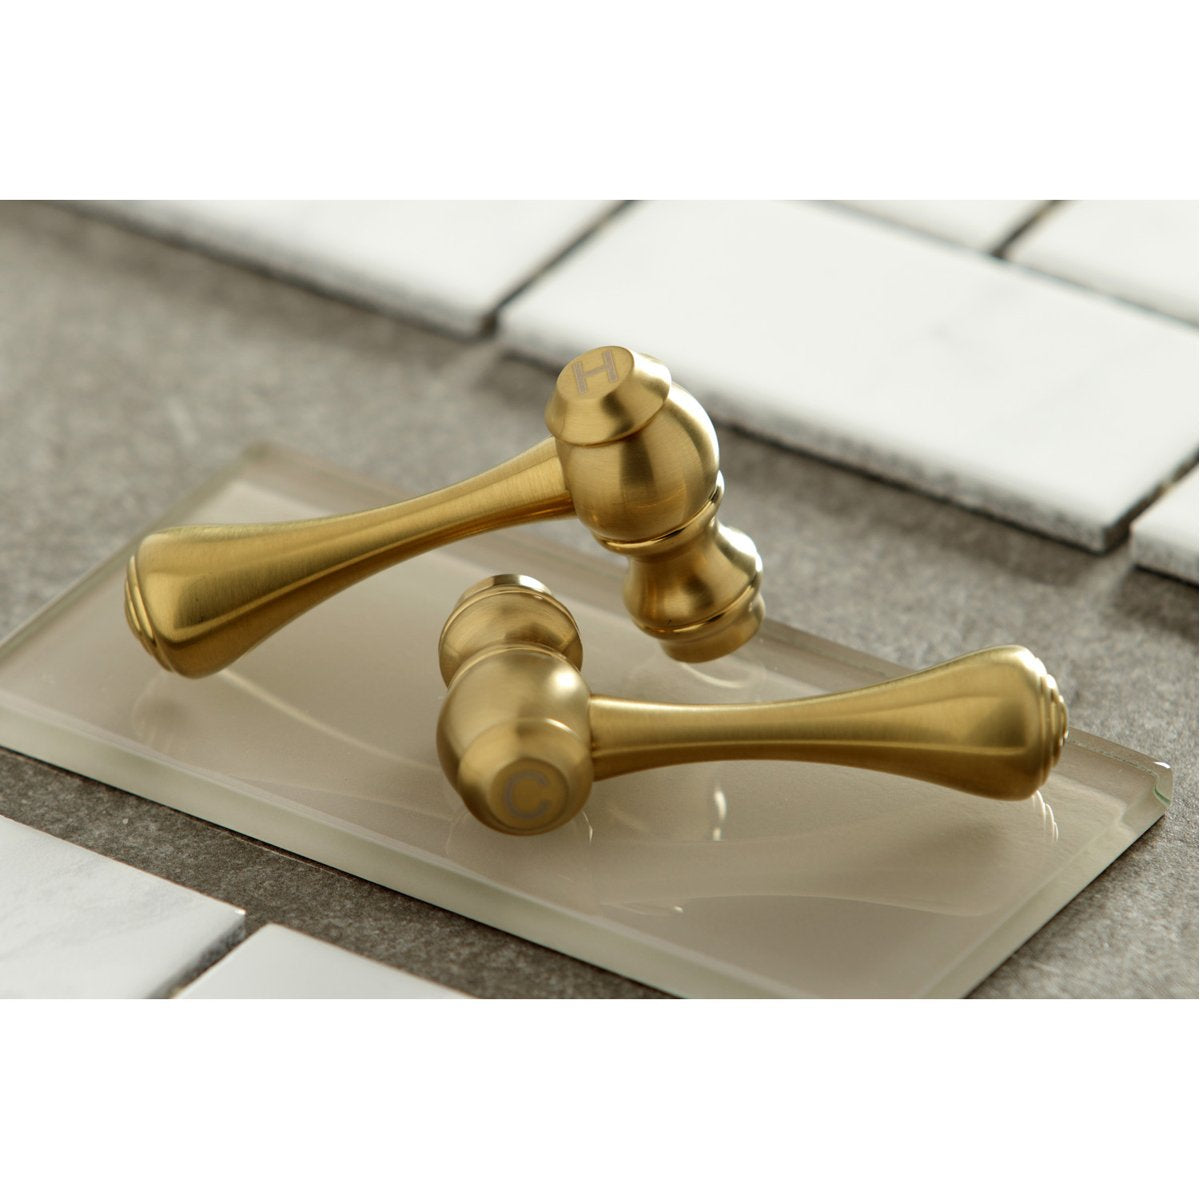 Kingston Brass English Country Wall Mount 2-Hole Bathroom Faucet